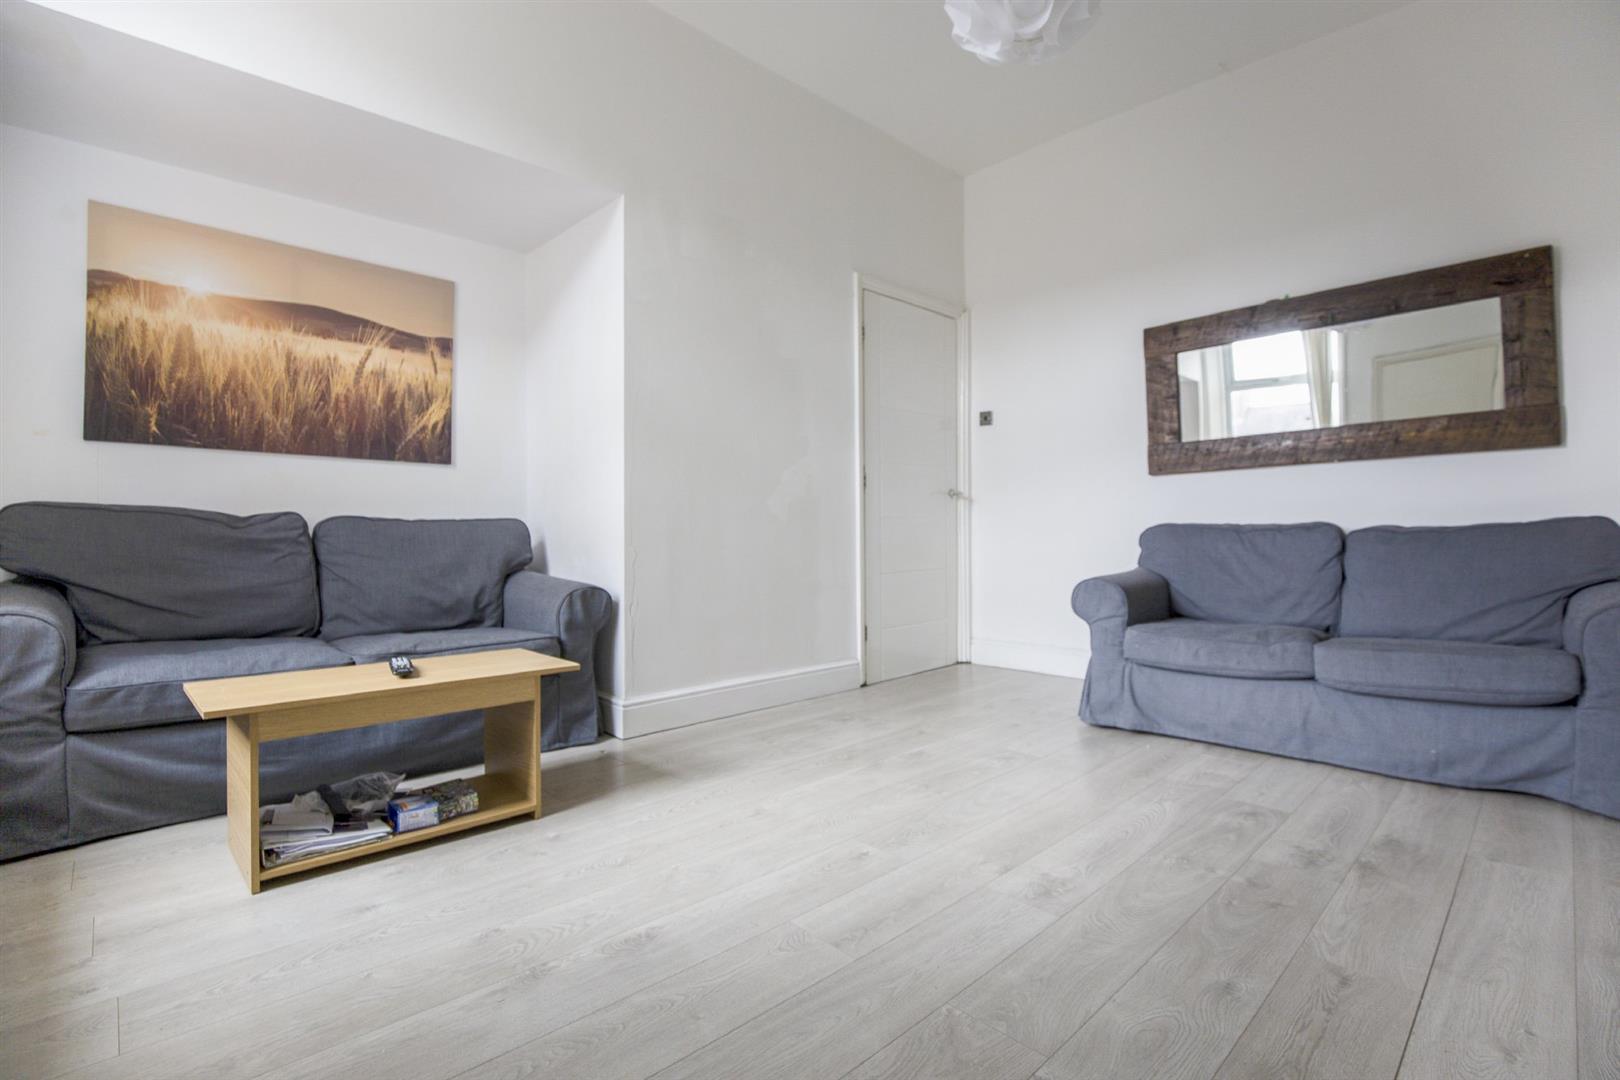 4 bed maisonette to rent in Chillingham Road, Newcastle upon Tyne - Property Image 1